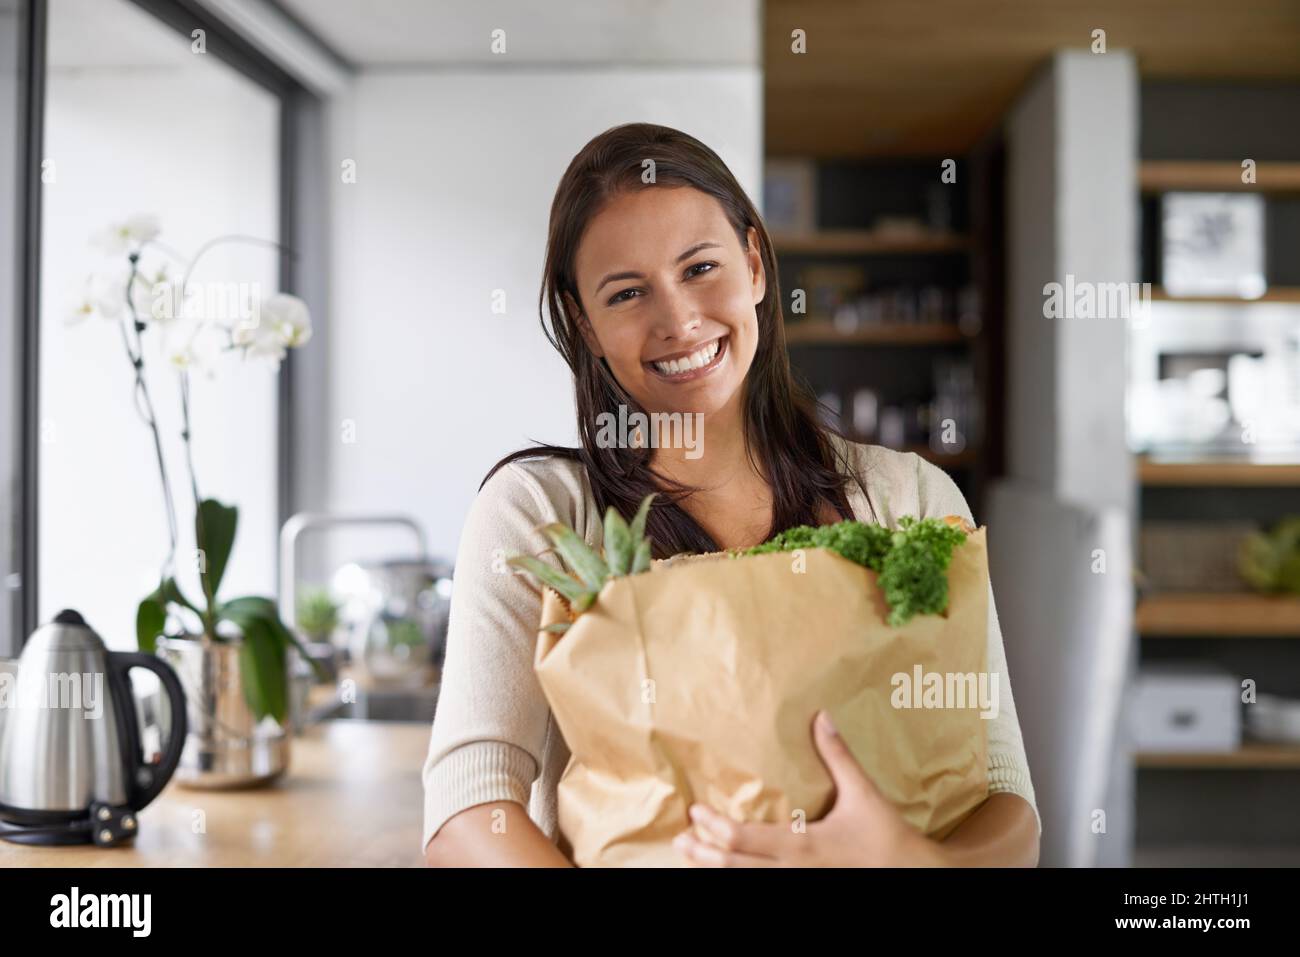 I only buy organic. A young woman standing in her kitchen holding a bag of groceries - portrait. Stock Photo